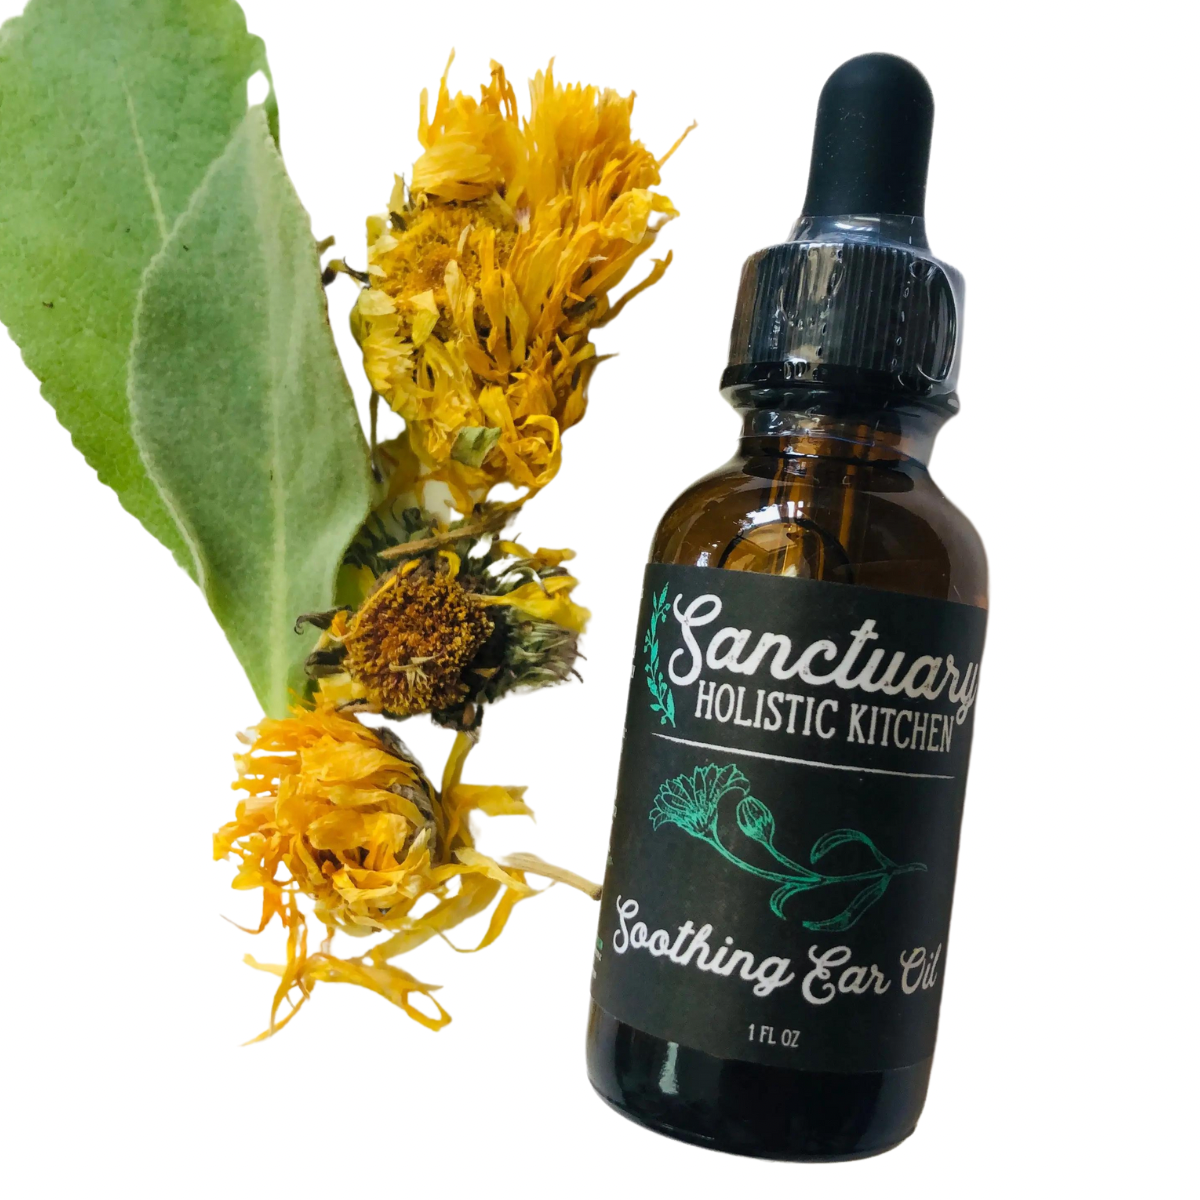 Sanctuary Holistic Kitchen Soothing Ear Oil